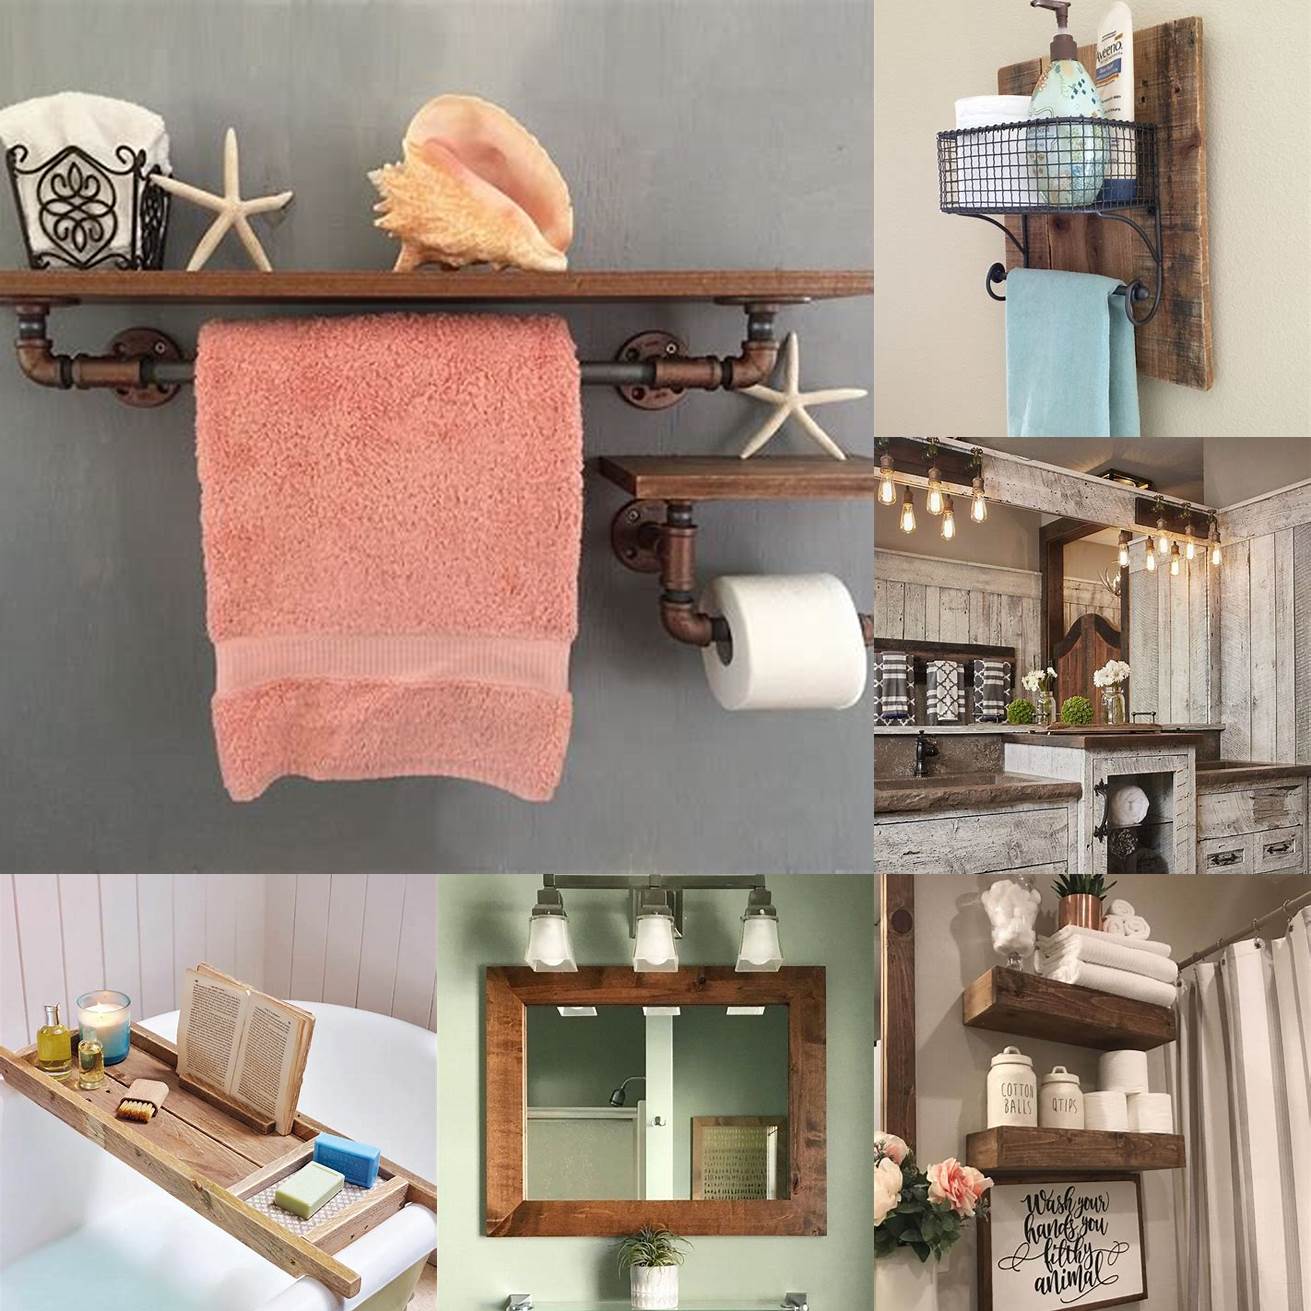 Pair it with rustic or vintage-style bathroom accessories such as a wooden mirror frame or metal towel rack